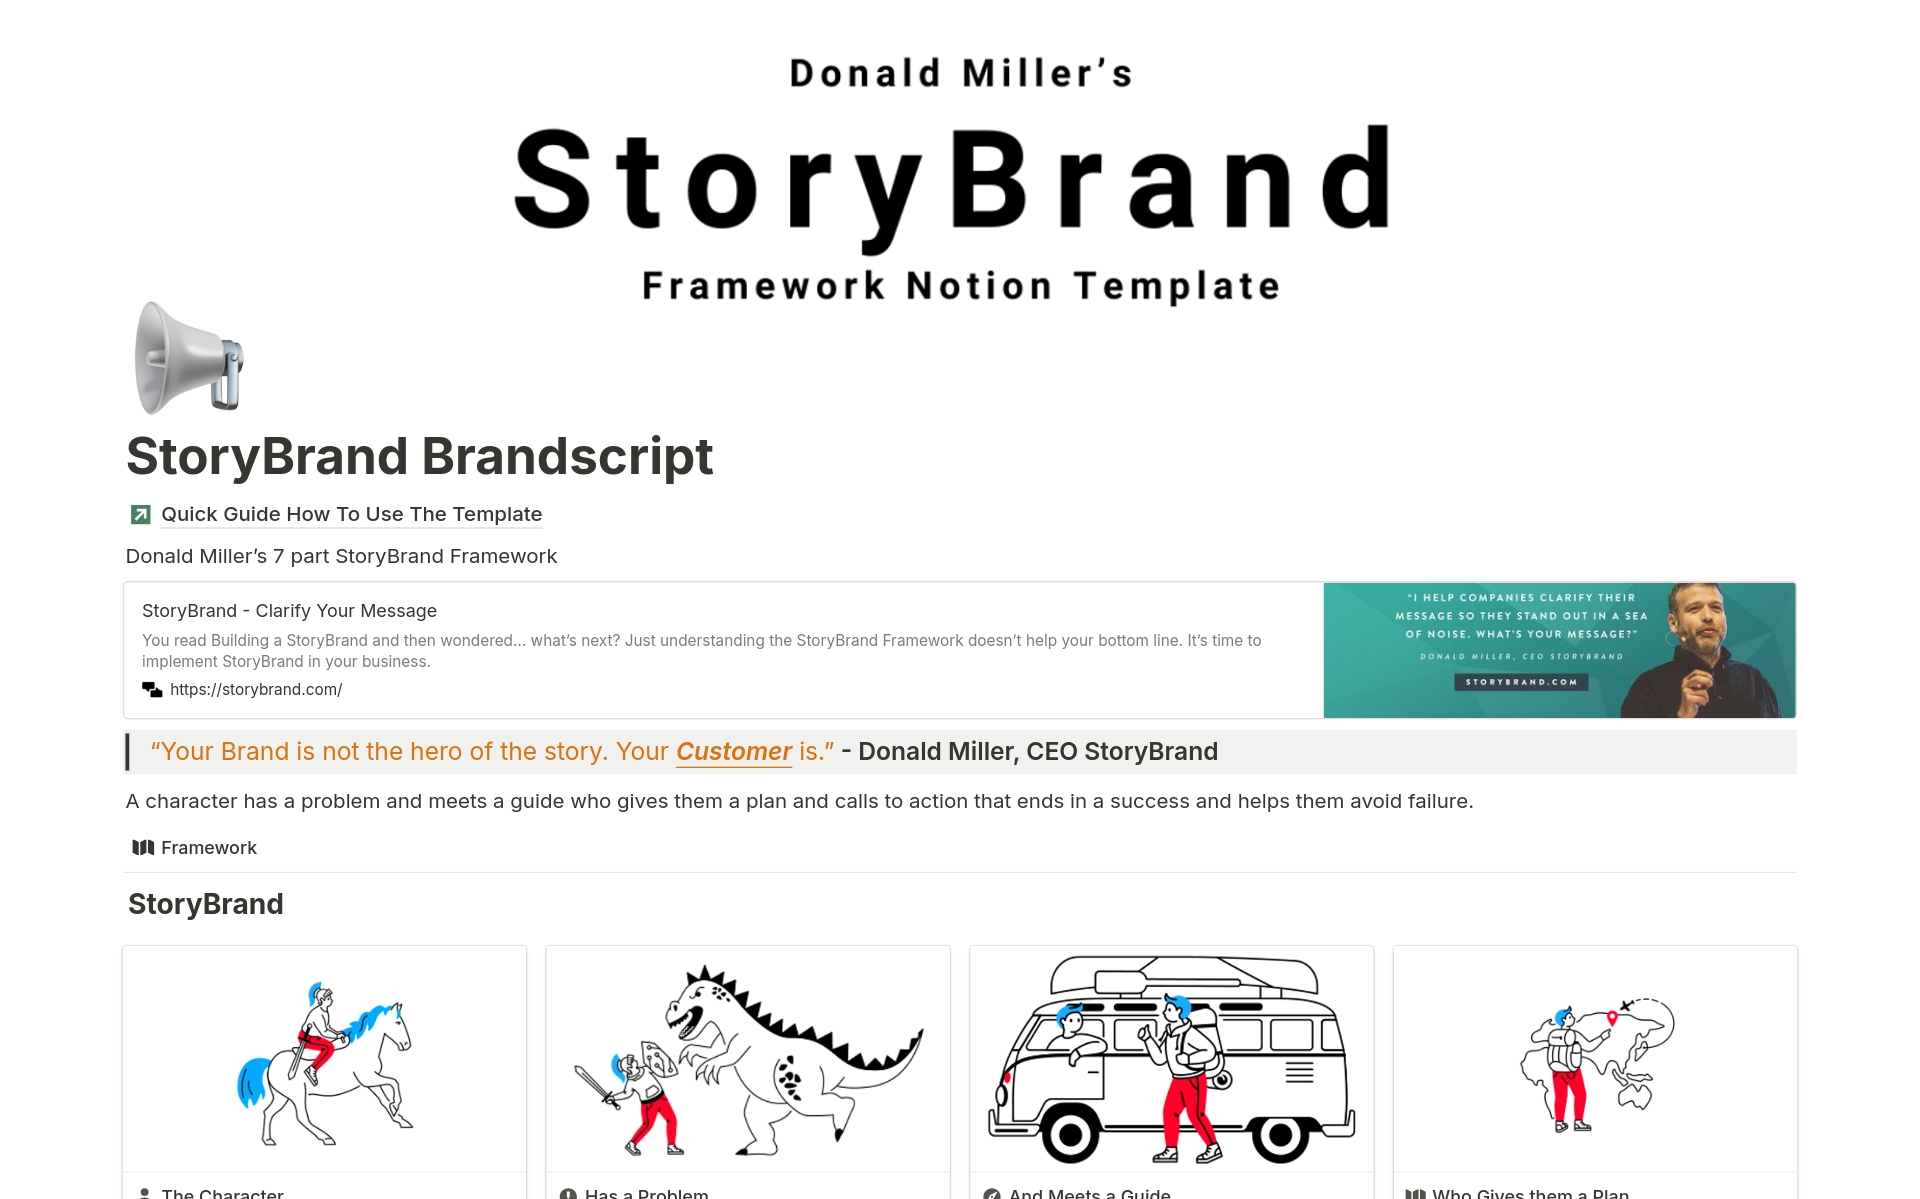 Donald Miller's 7 step StoryBrand Framework notion template to help you clarify your message.